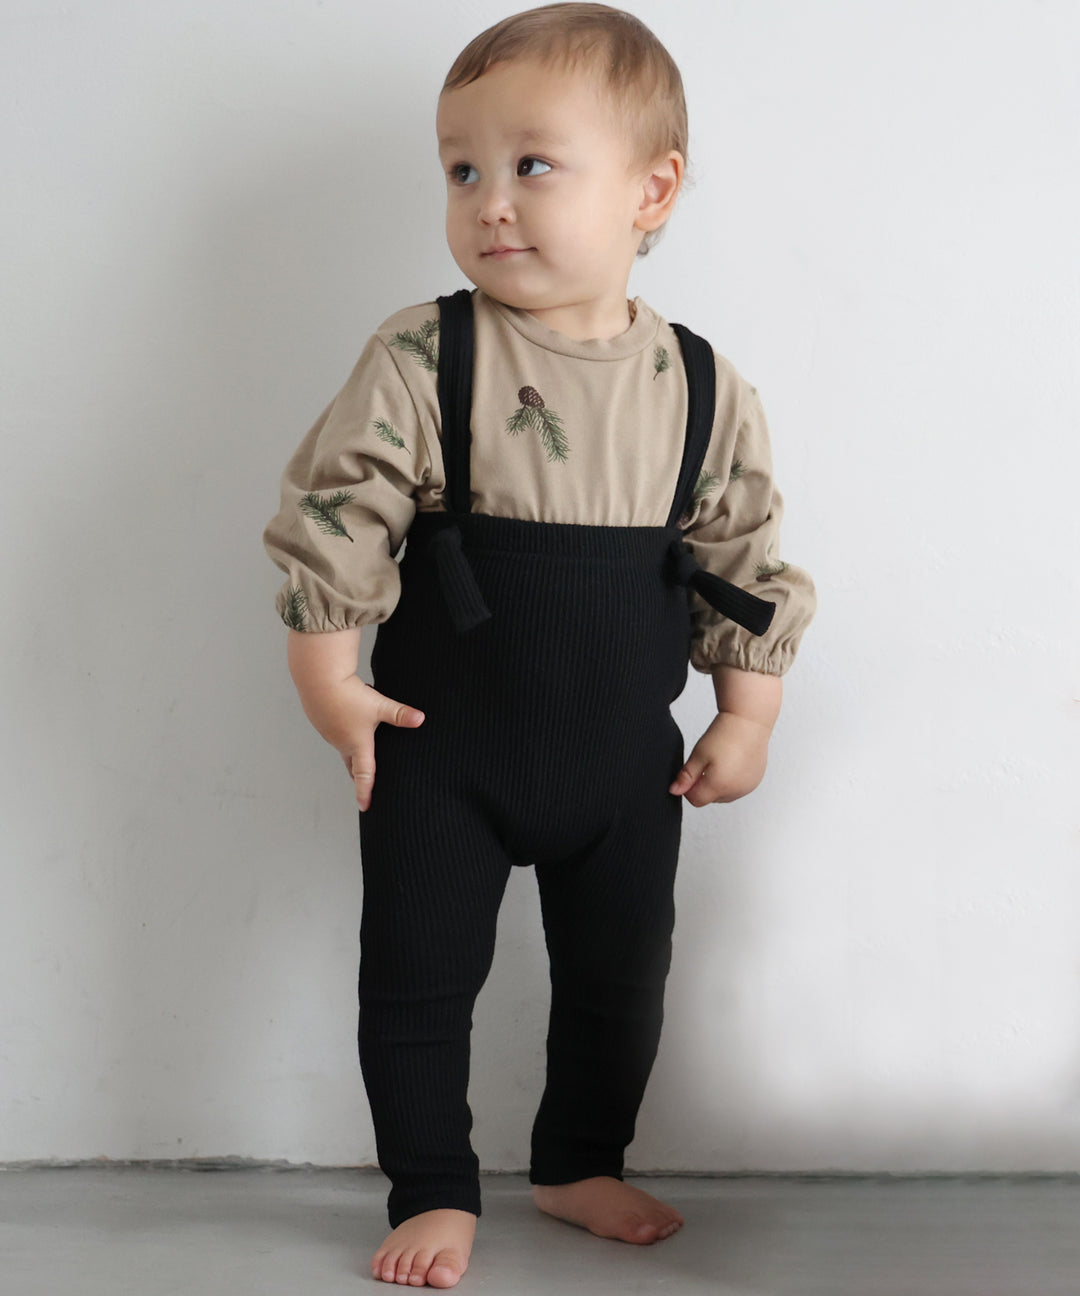 Ribbed Overalls Pants